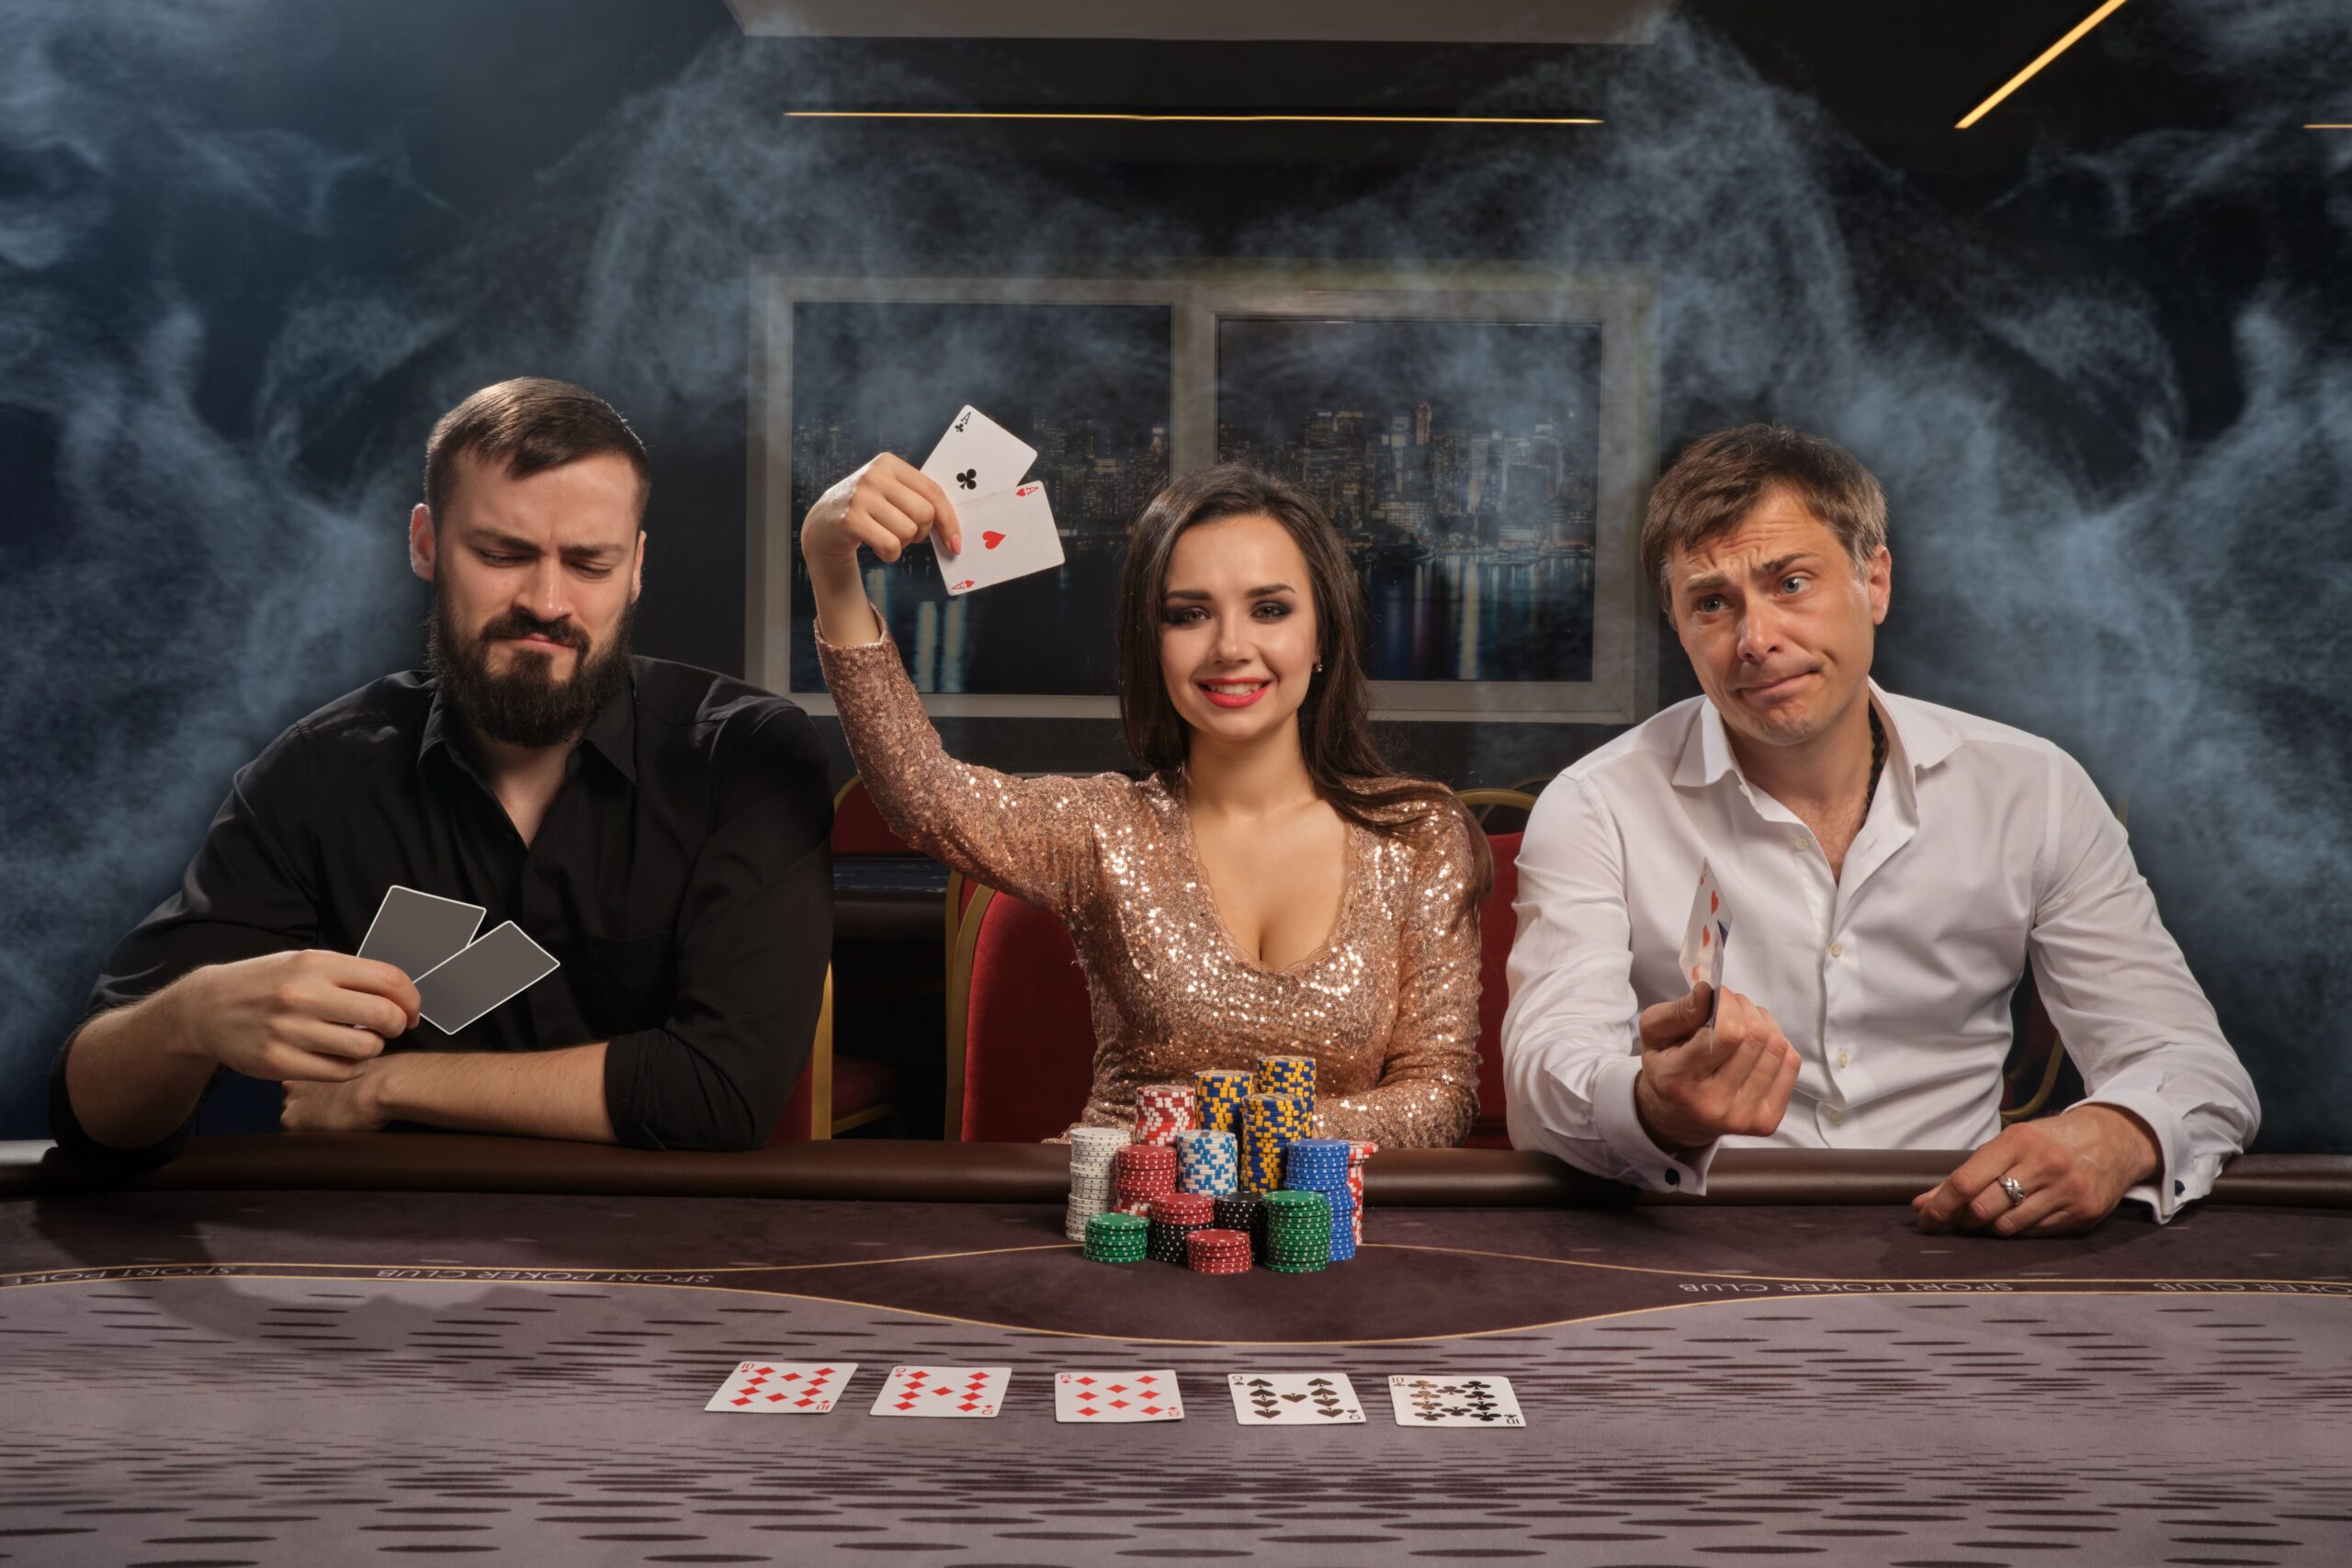 cheerful-friends-are-playing-poker-casino-smoke-girl-has-won-showing-her-cards-men-had-lost-youth-are-making-bets-waiting-huge-win-gambling-money-games-fortune (2) (1)